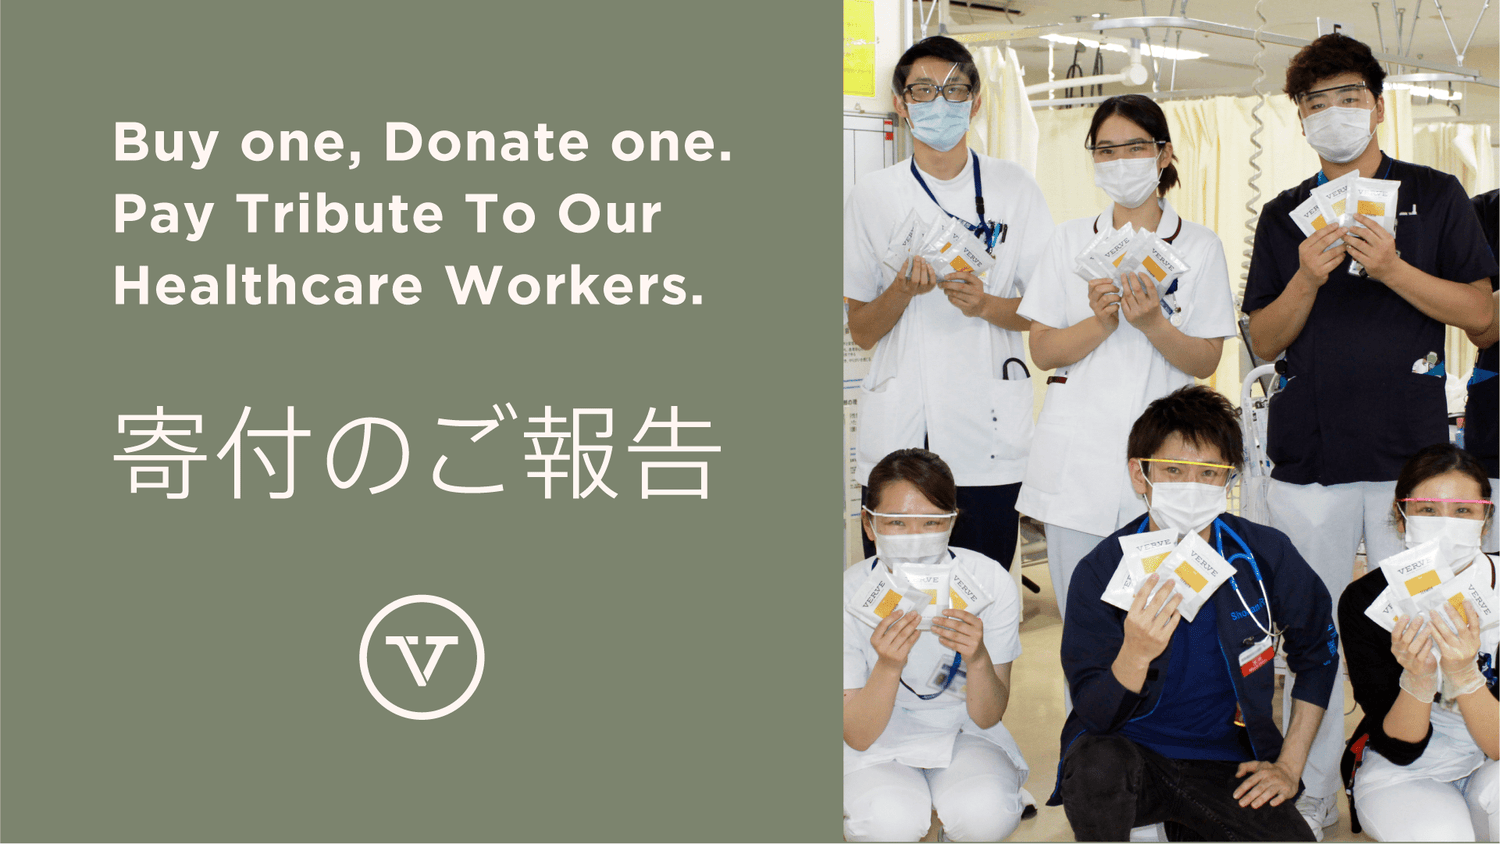 「BUY ONE, DONATE ONE」寄付のご報告